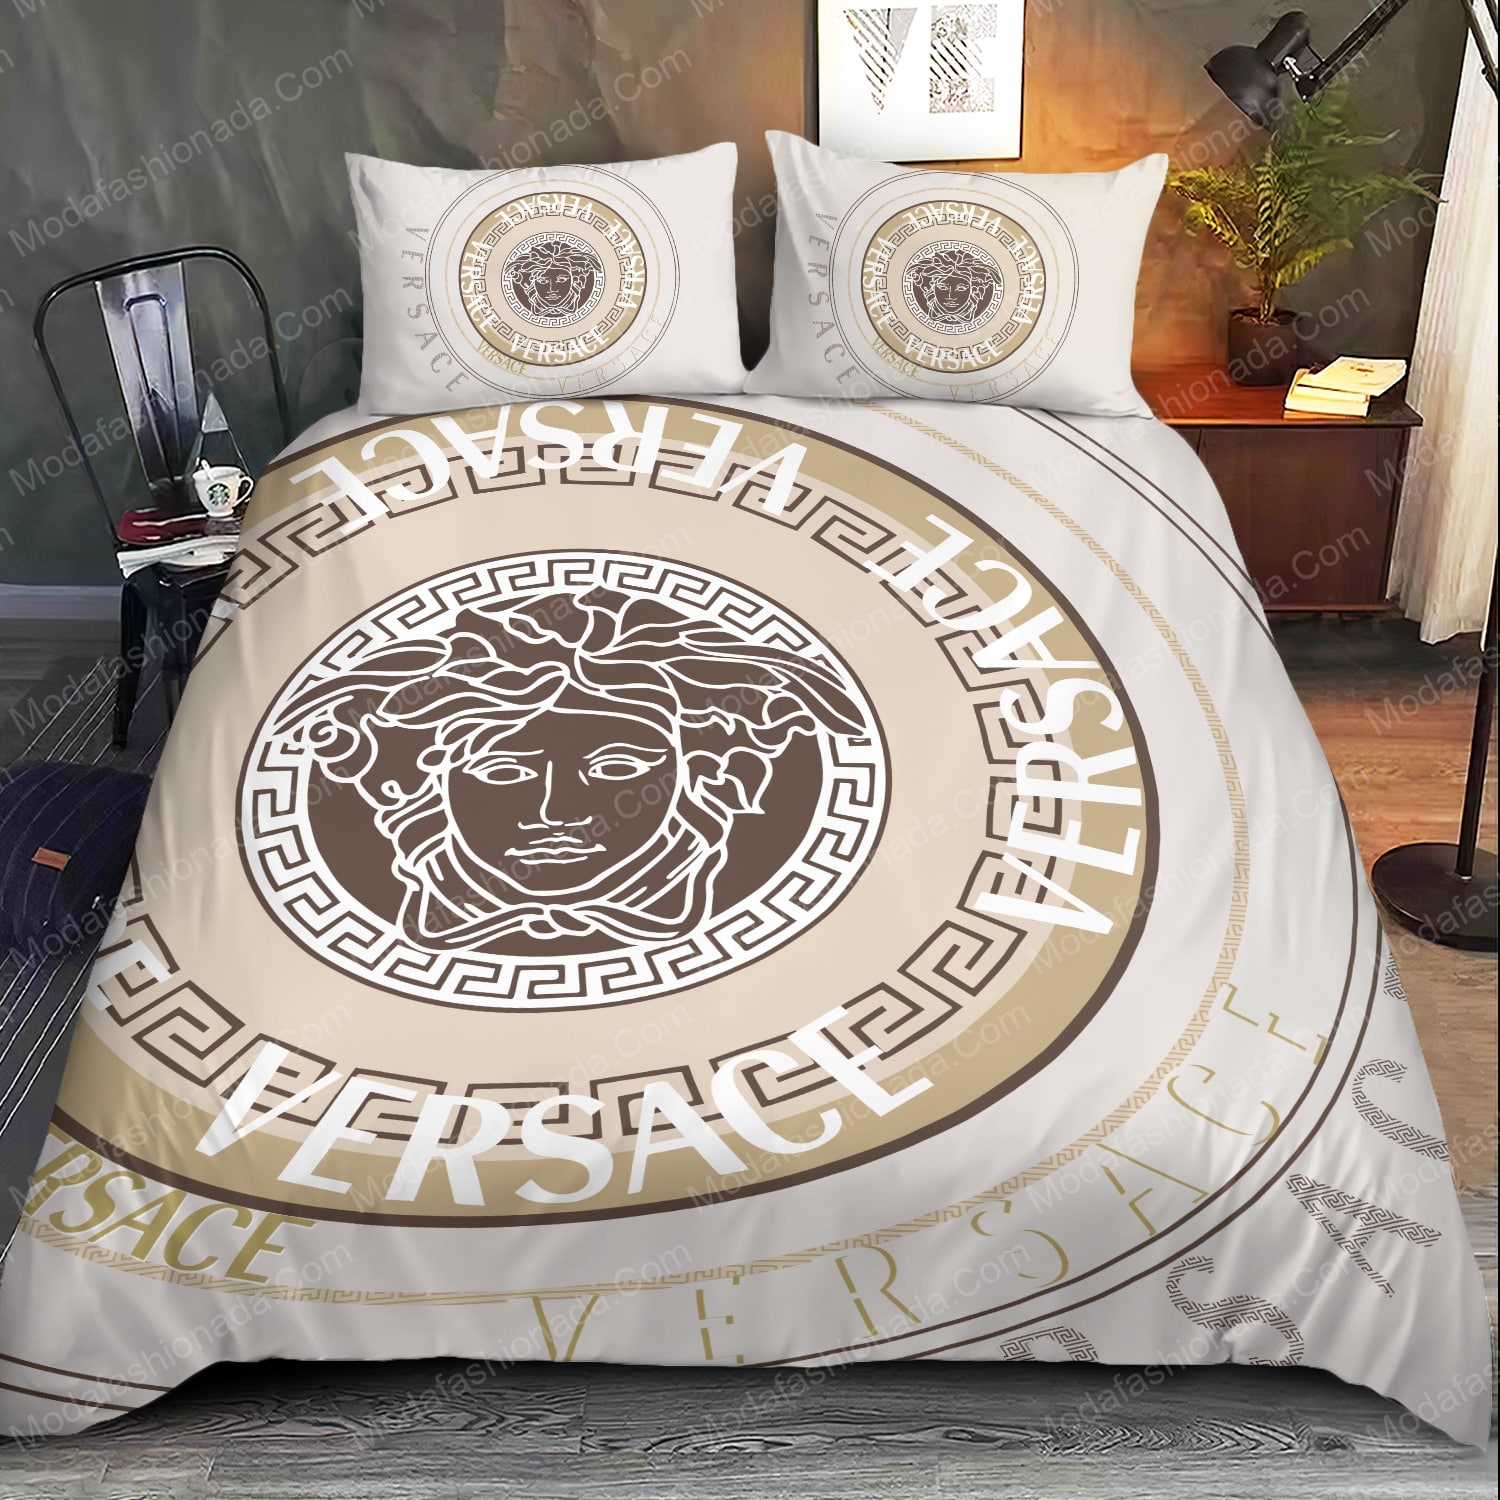 Versace Luxury Brand Logo High-End Bedding Sets Lv Bedroom Decor  Thanksgiving Decorations For Home Best Luxury Bed Sets - Ecomhao Store